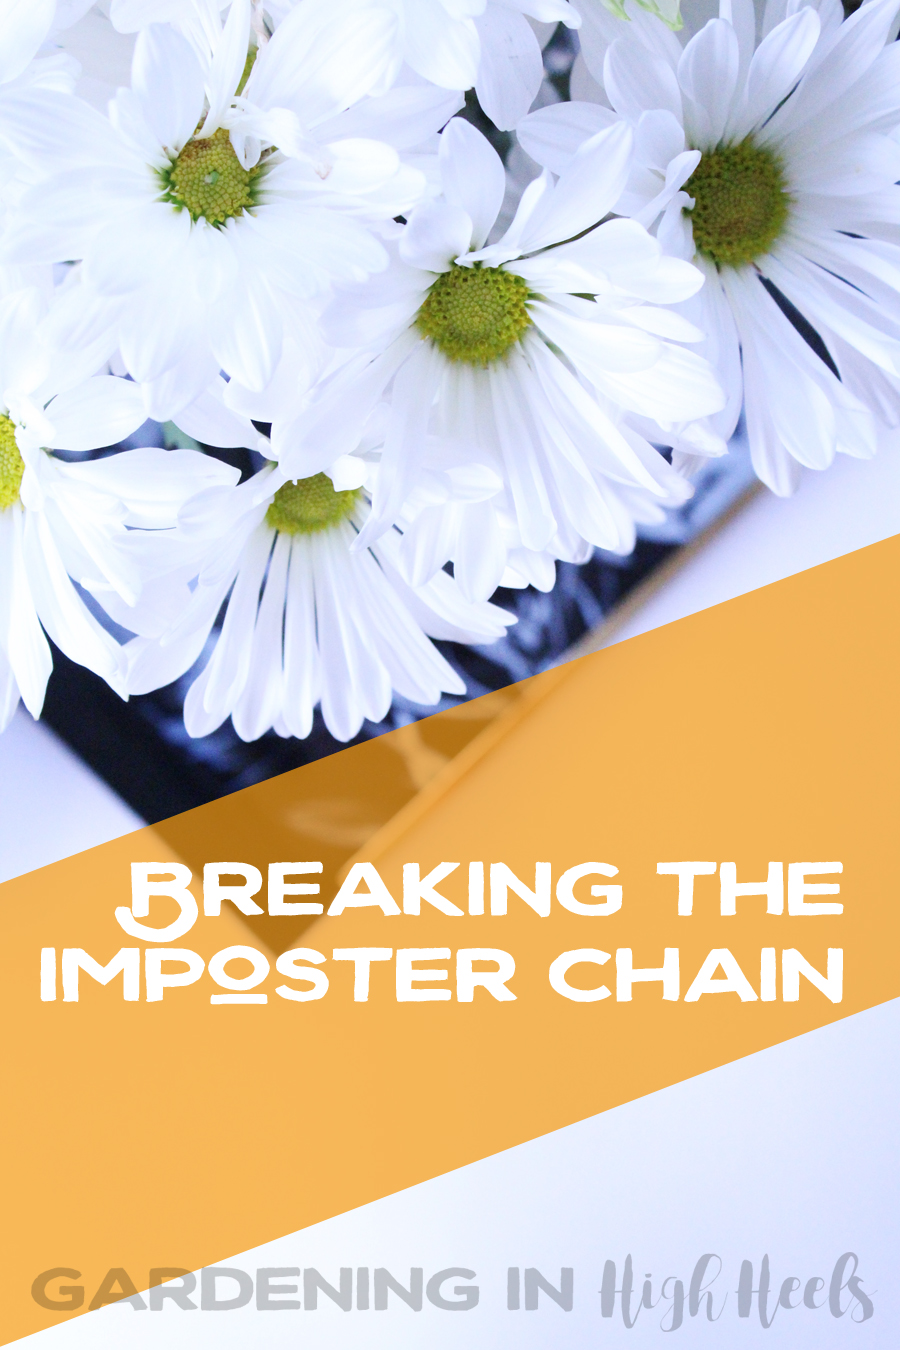 Imposter syndrome is the worst! Super smart ways to break the chain for yourself and "trick" yourself into getting your thinking and mental state back on track!